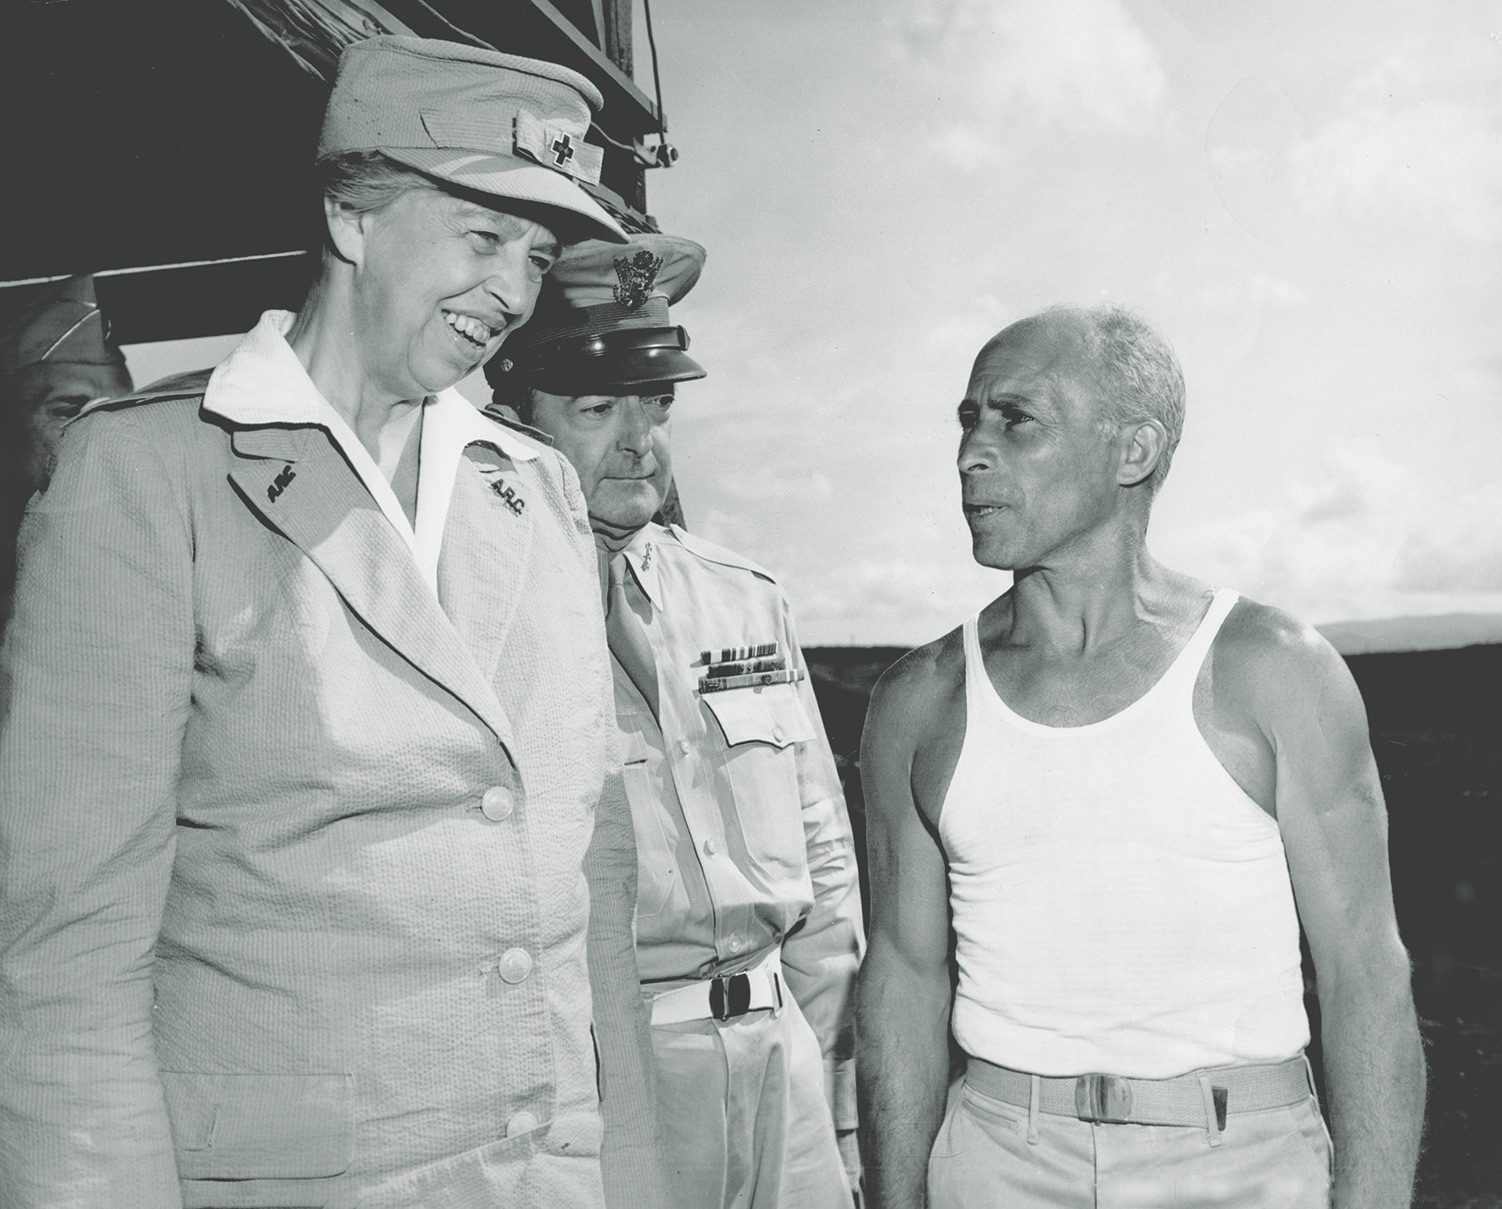 First Lady Eleanor Roosevelt and General Robert C. Richardson Jr. visit d’Eliscu at his school in Hawaii in 1943.